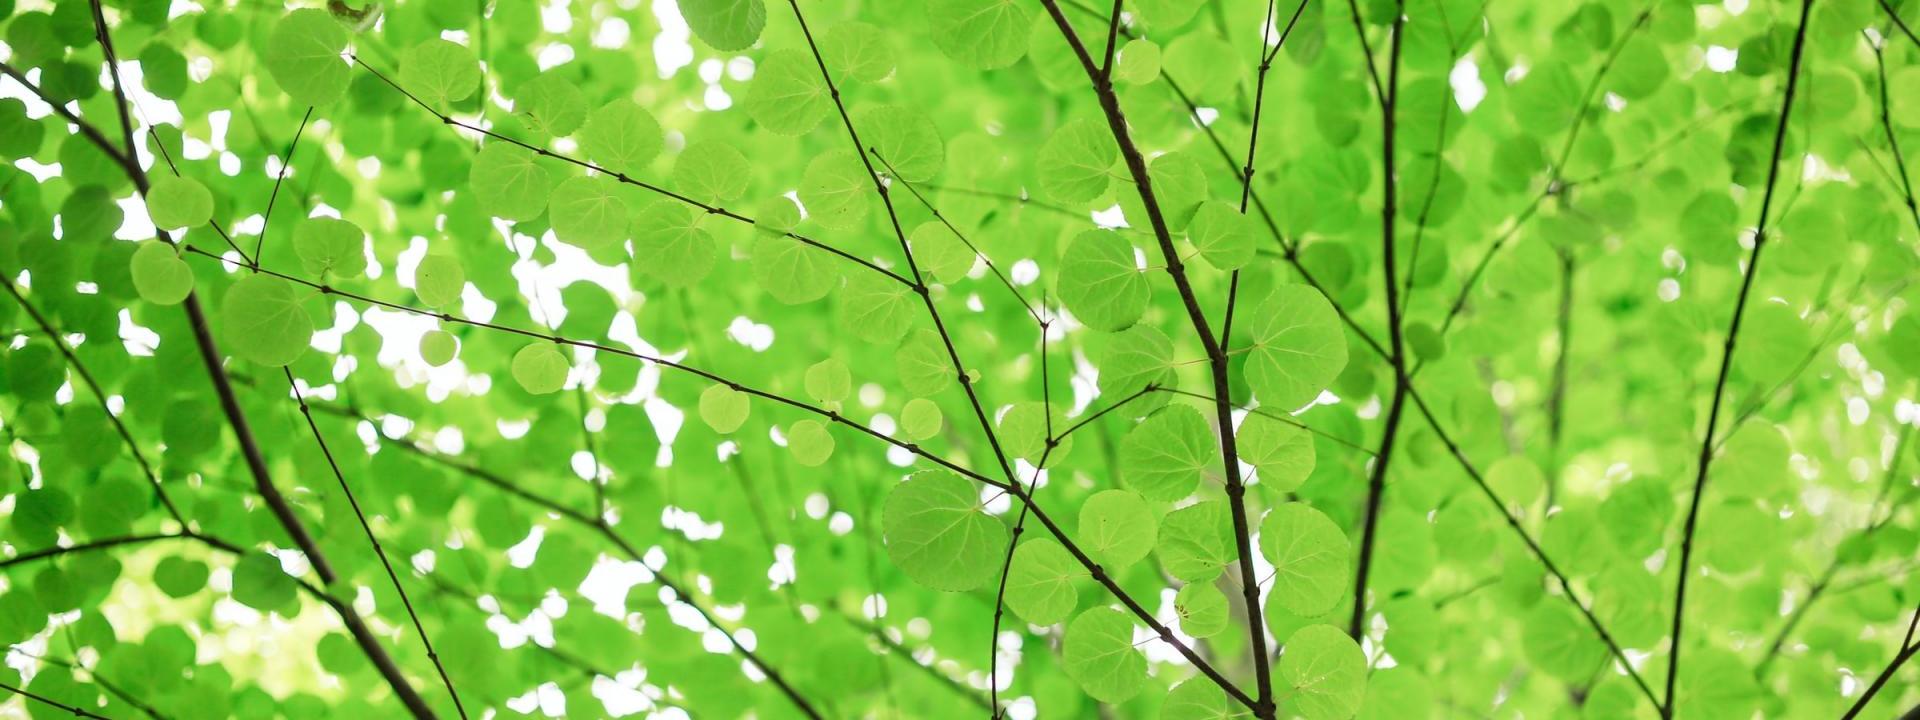 Green leaves on a tree against a bright sky